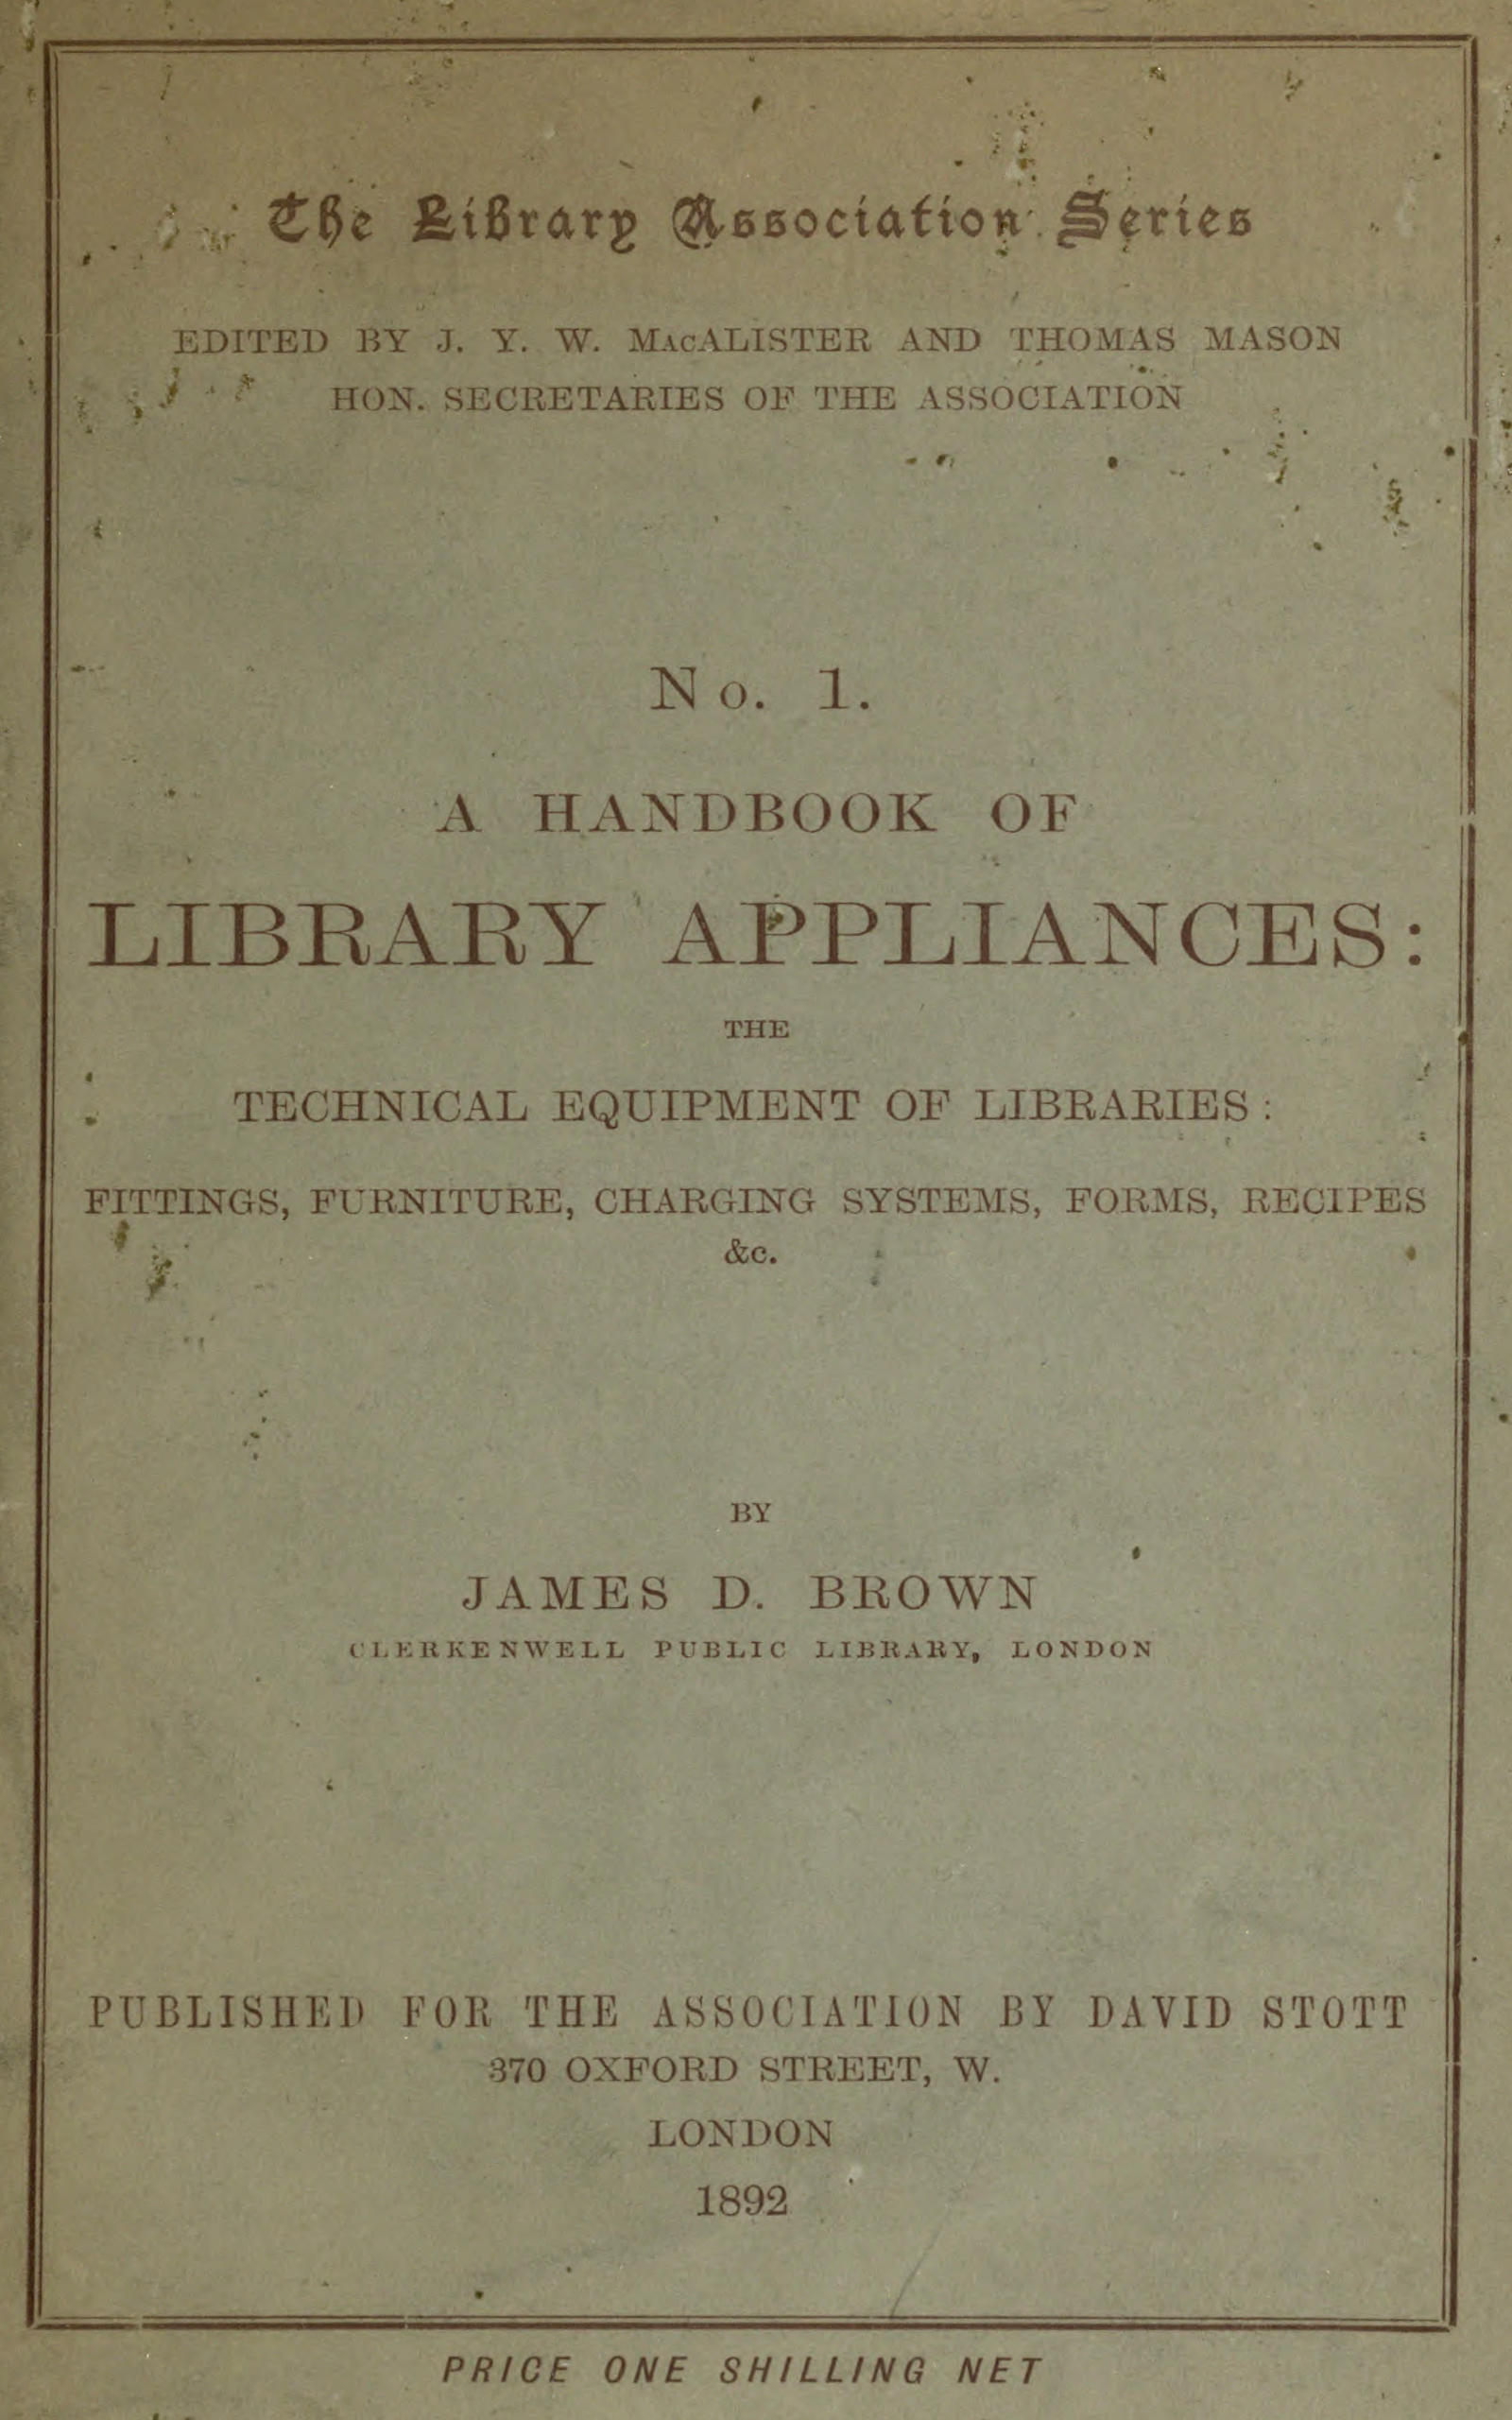 A handbook of library appliances&#10;The technical equipment of libraries: fittings, furniture, charging systems, forms, recipes, etc.